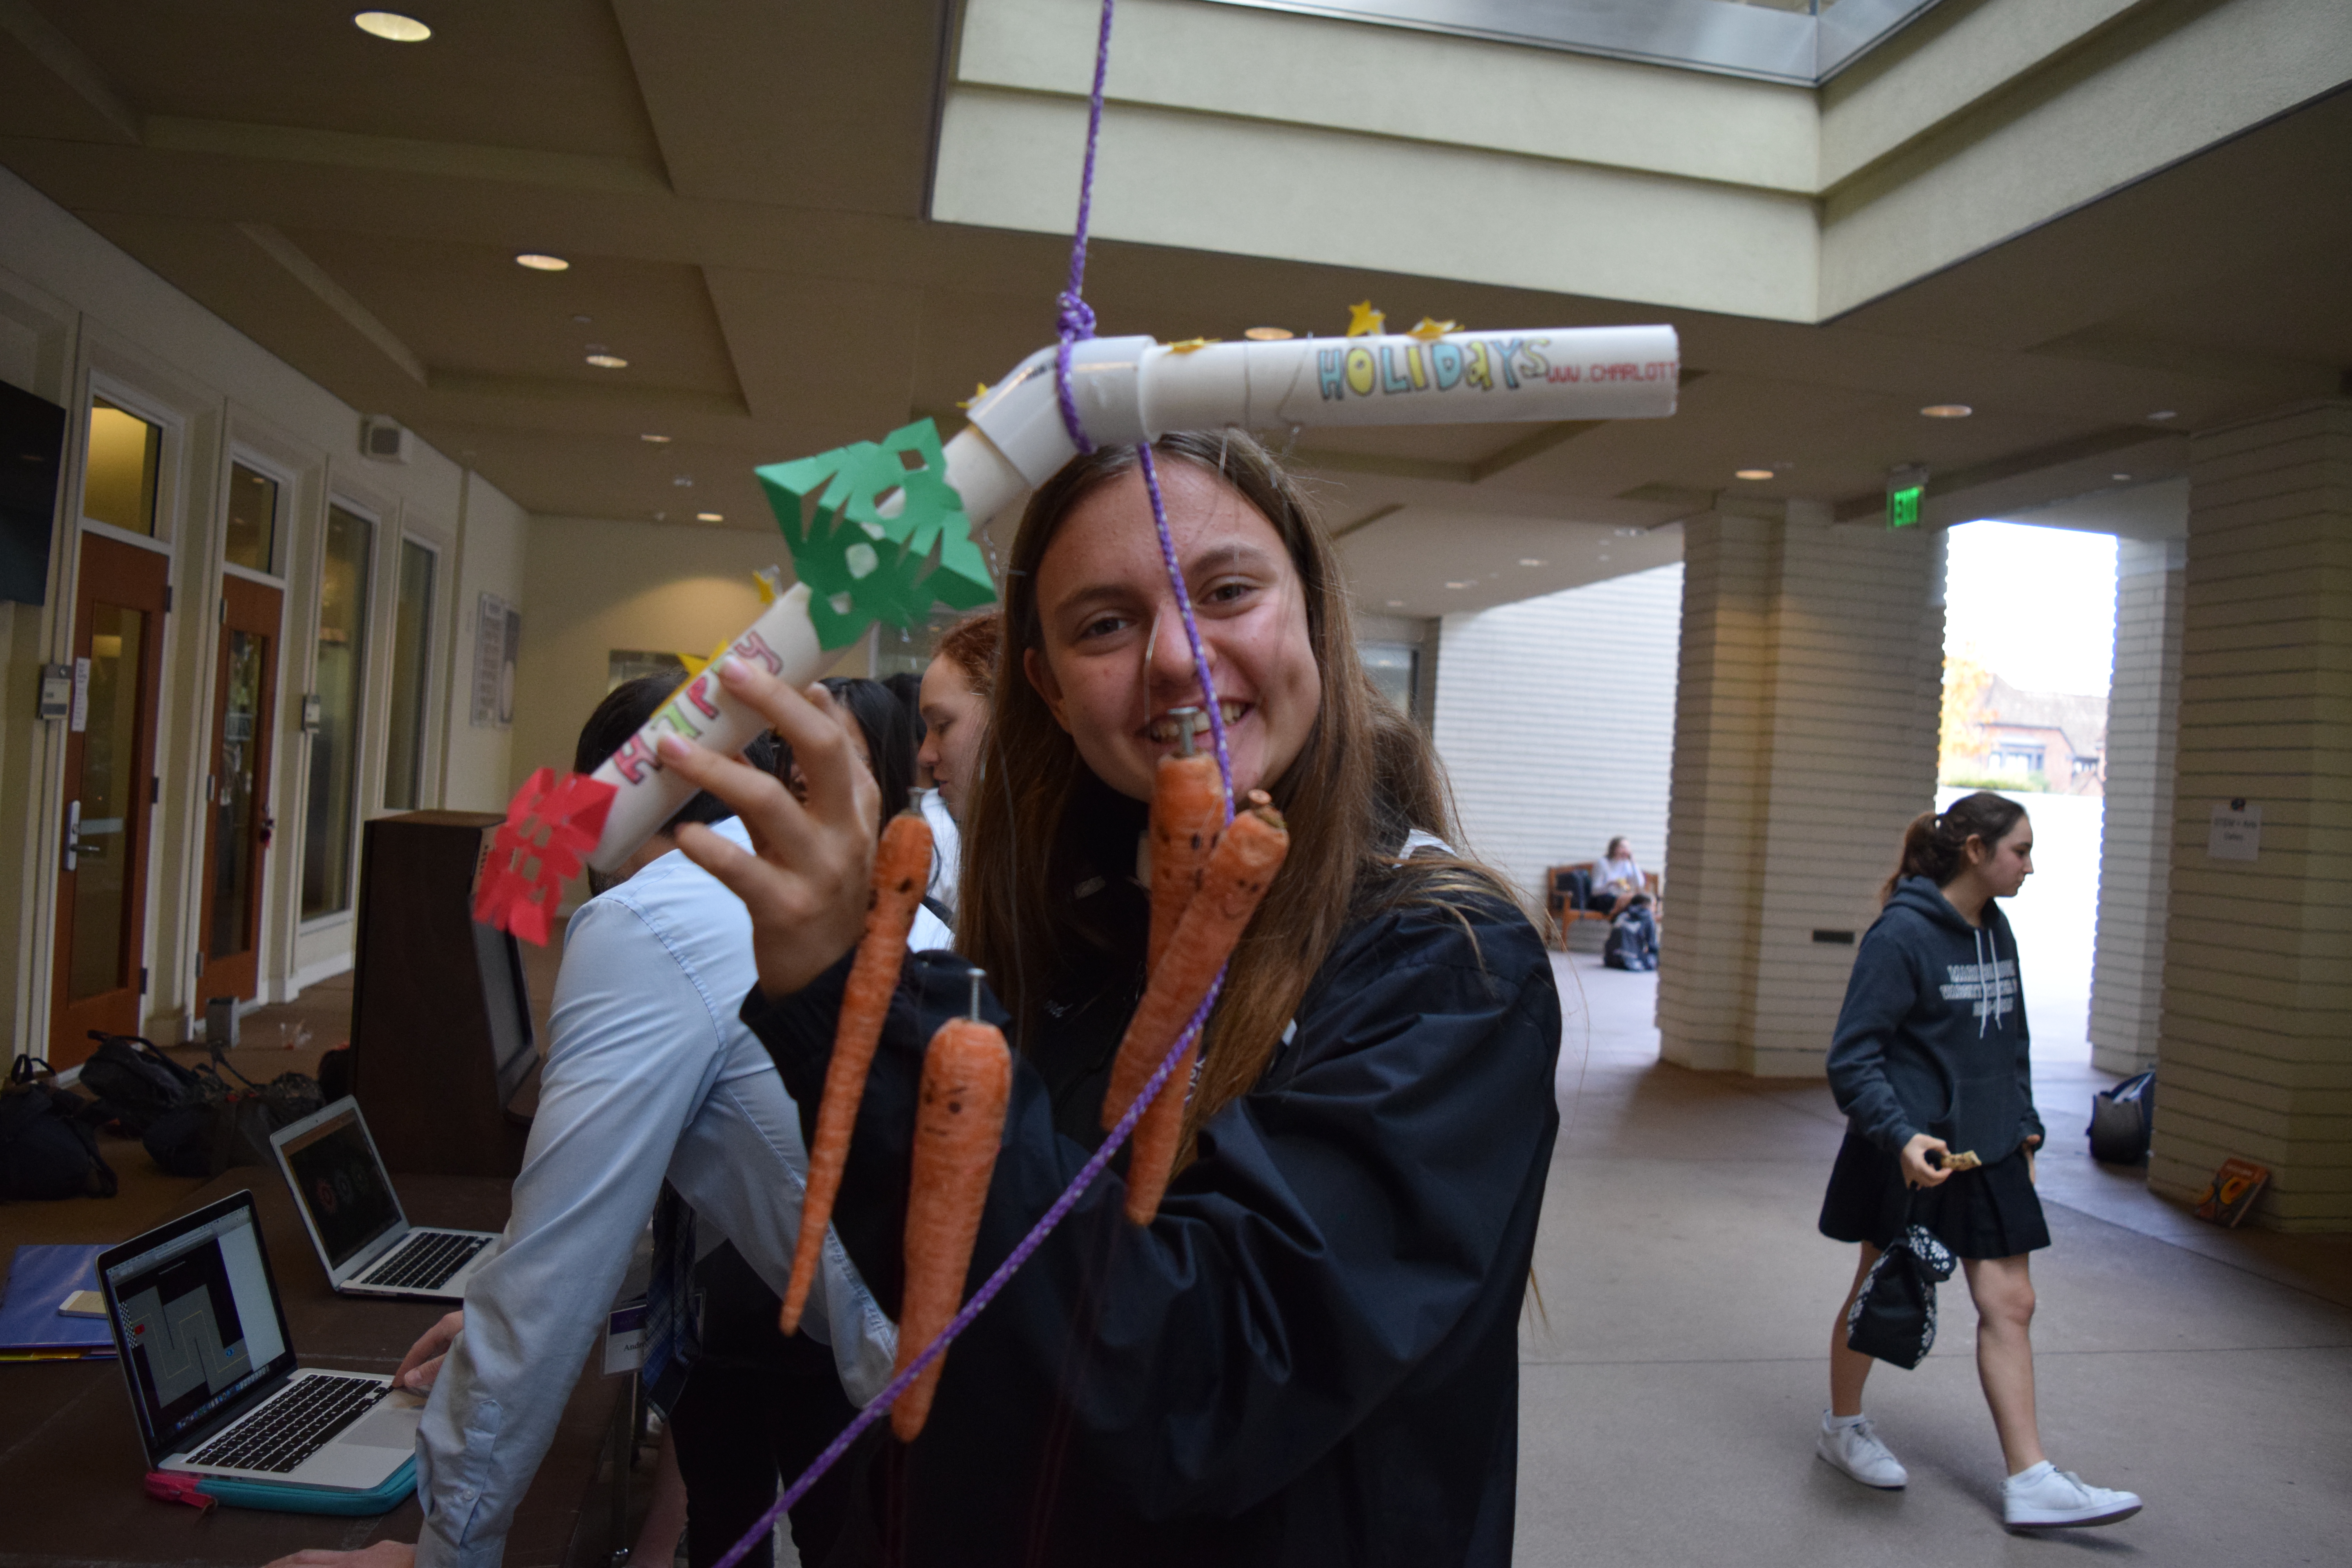 Megan '19 created a wond chime made of carrots for her project.